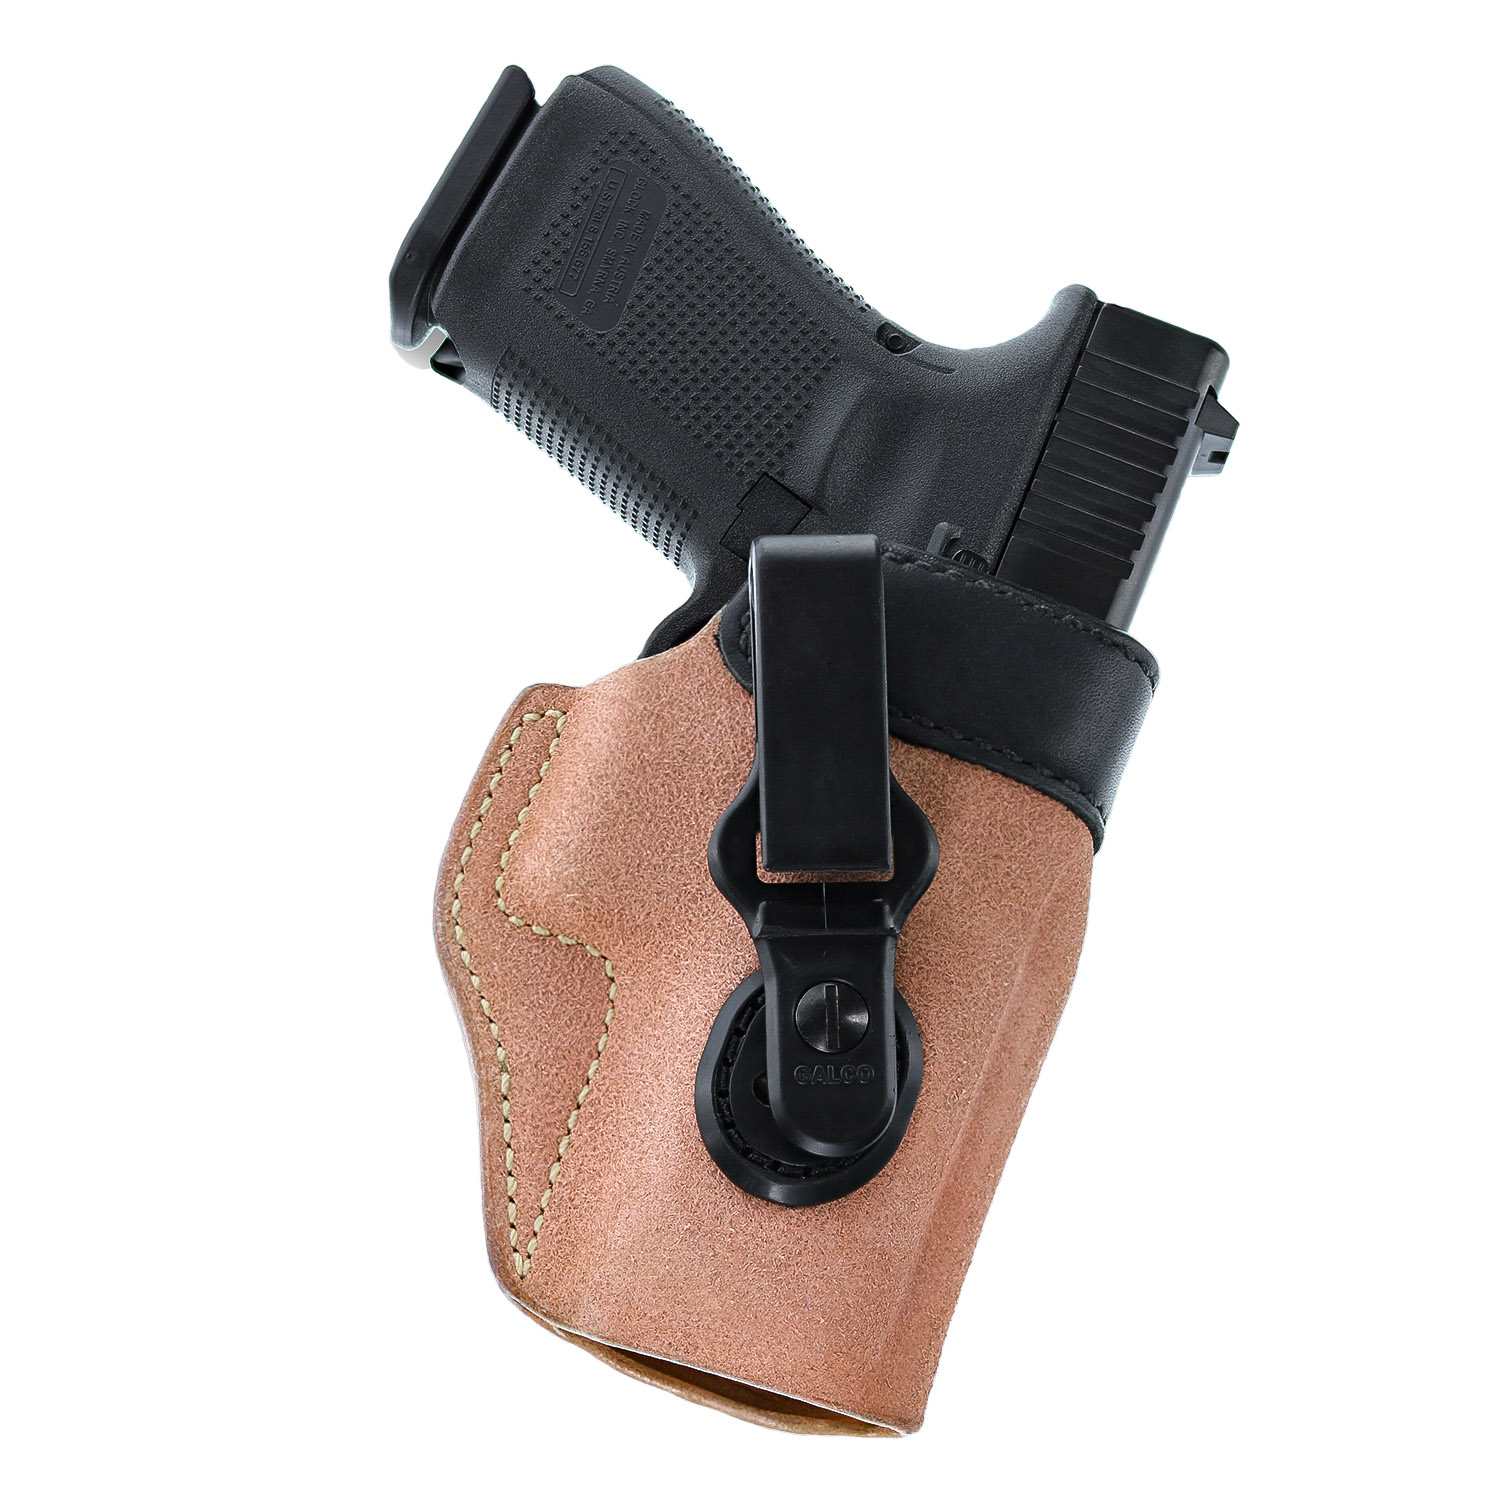 19X fits Glock 19 Galco S2-226B Scout 3.0 Strongside/Crossdraw IWB Holster 23 